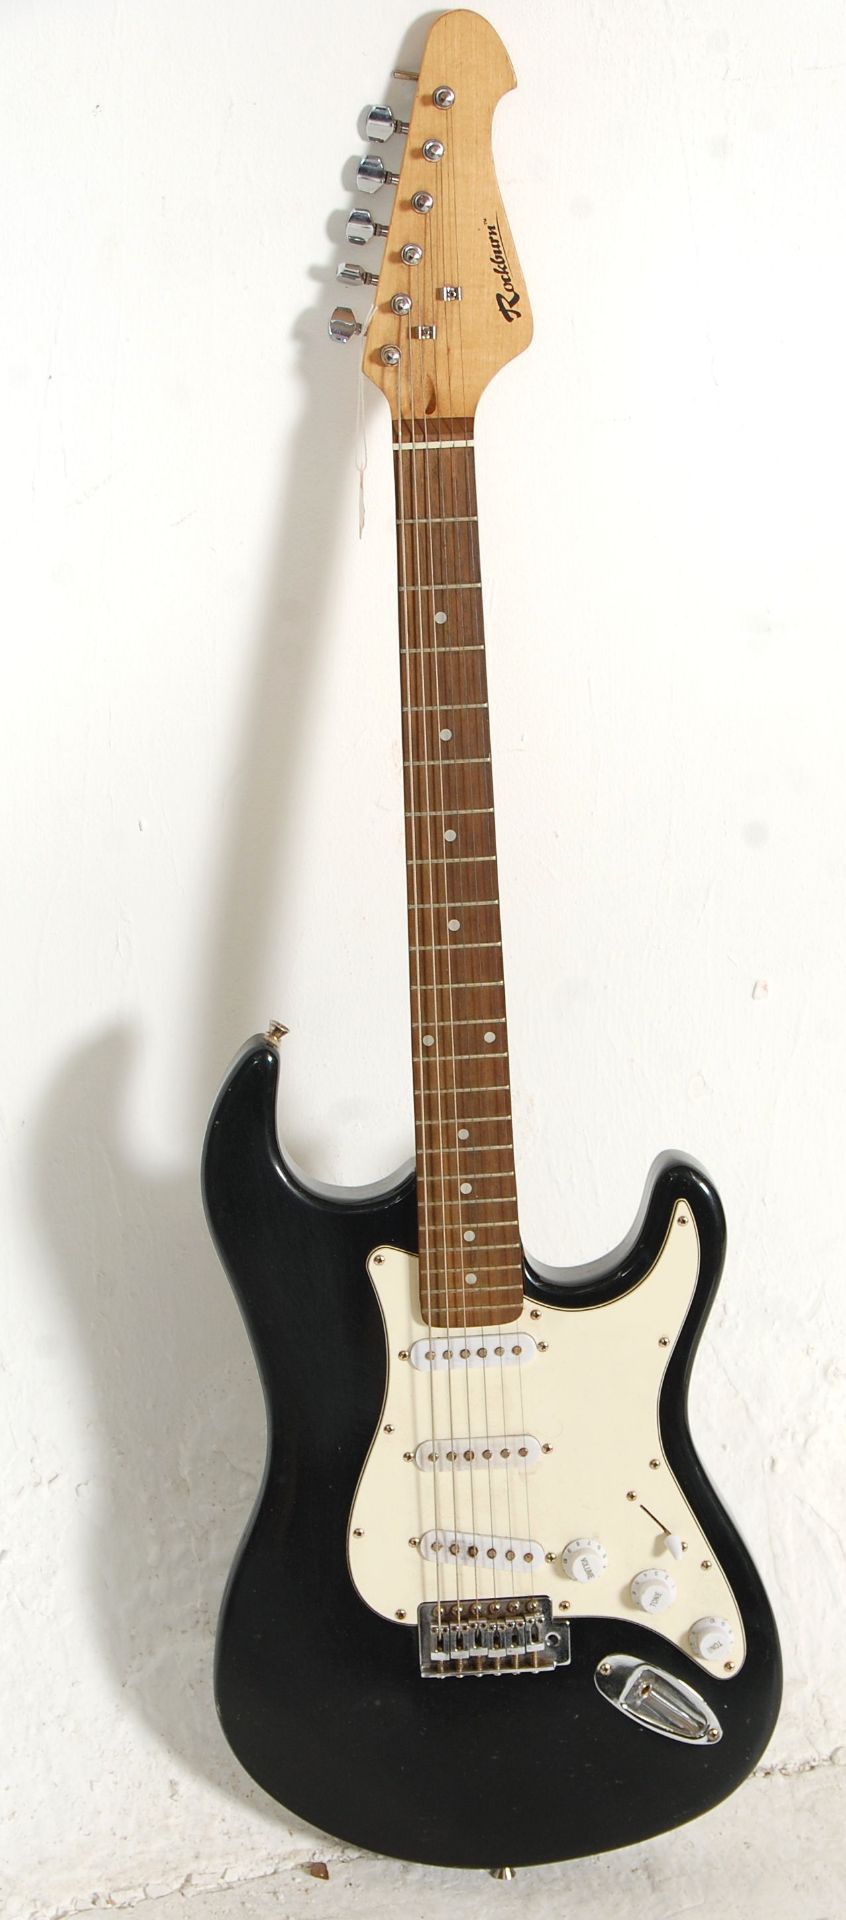 A Fender Stratocaster style Rockburn six string electric guitar having three control knobs with a